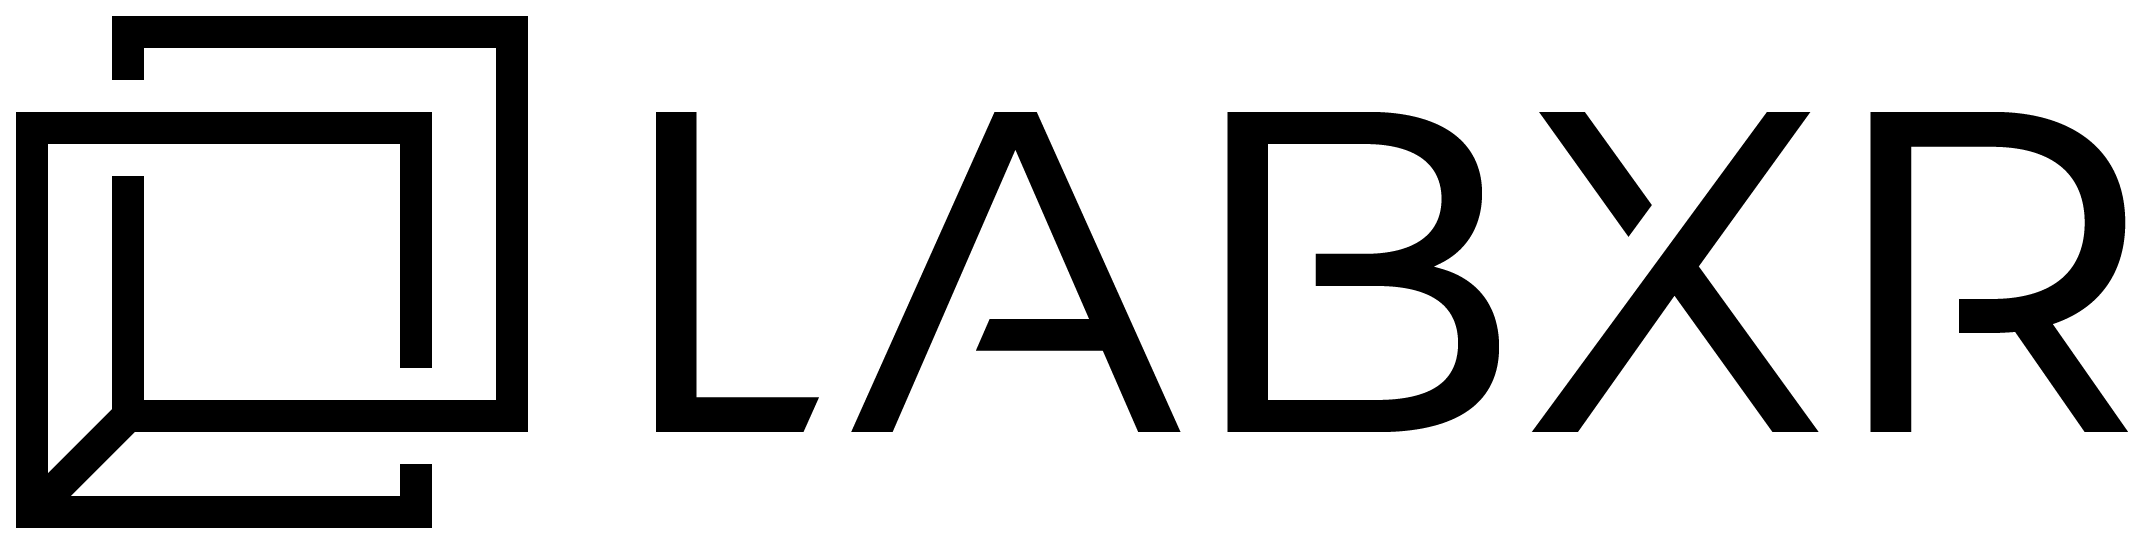 The logo for labxr was created using WordPress.